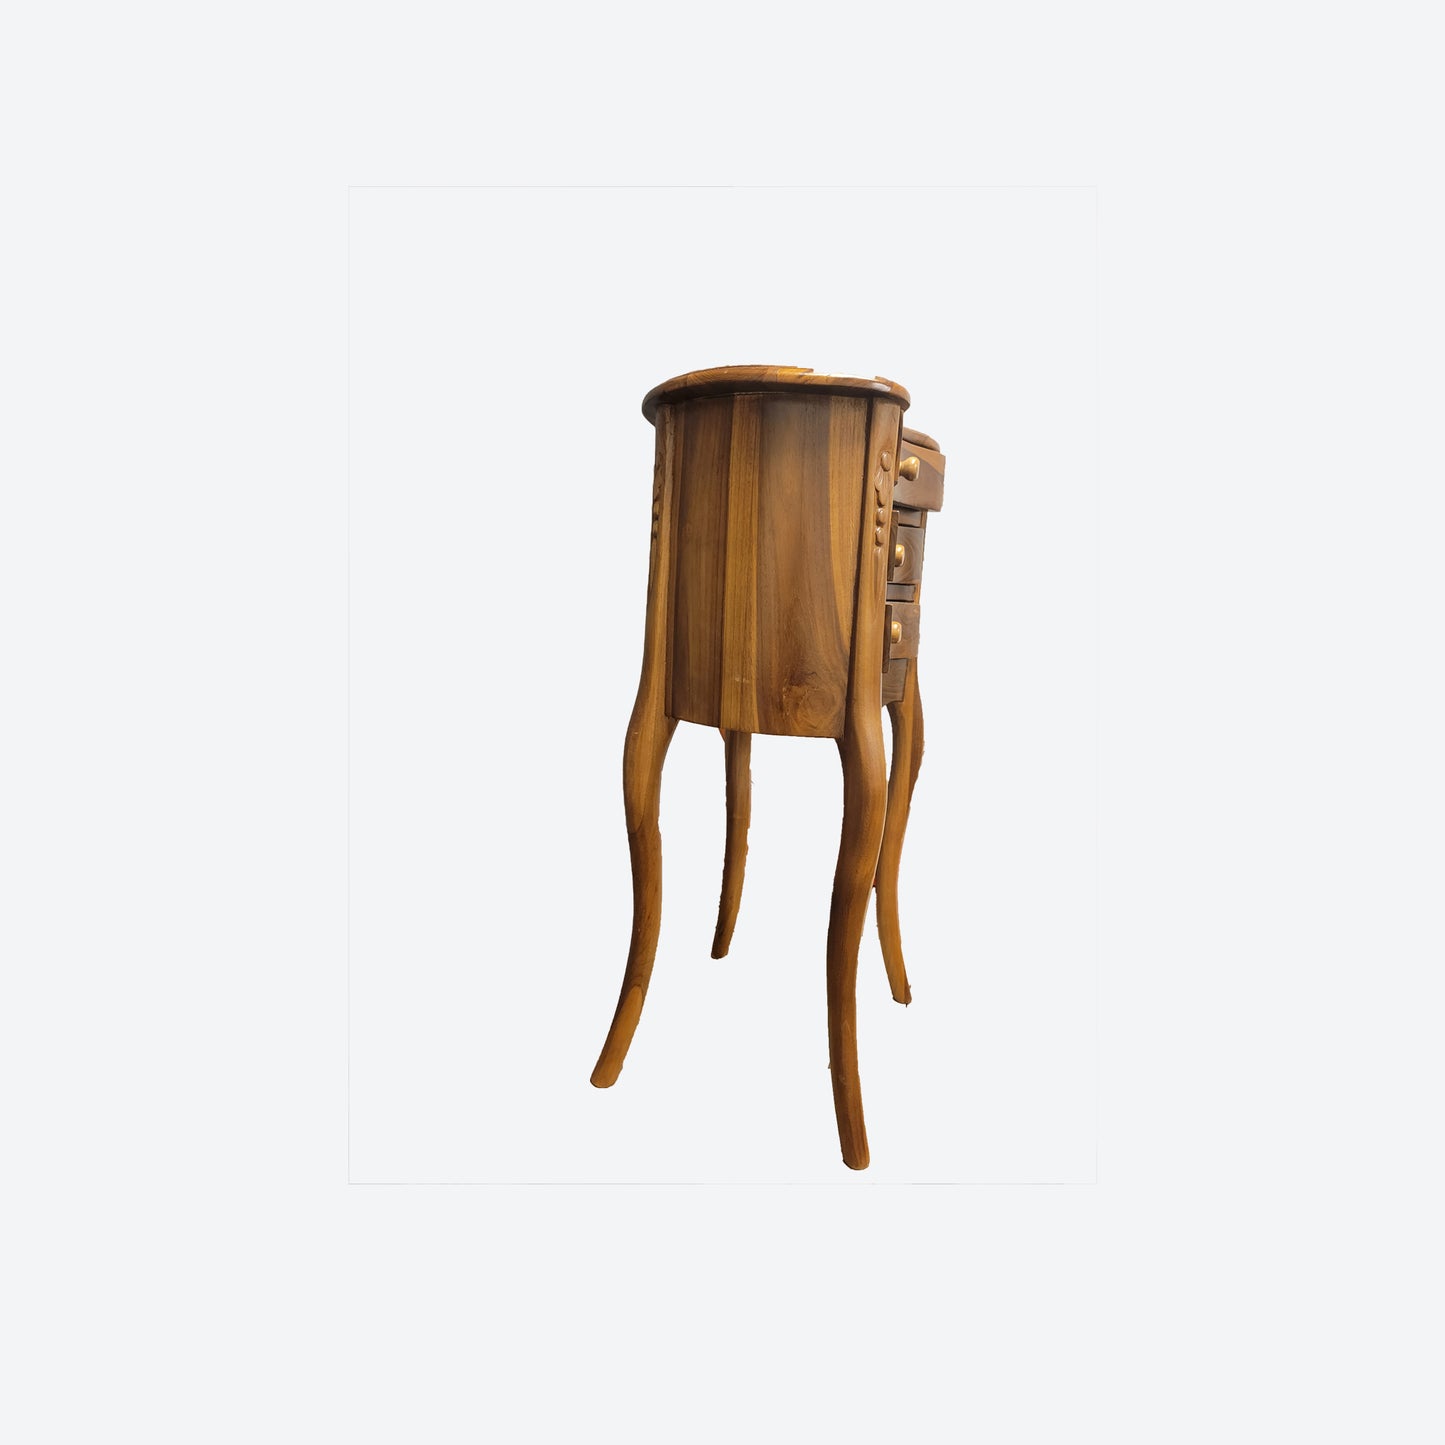 TEAK CURVED SIDE TABLE WITH THREE DRAWERS [Wide] -SK -SKU 1008A